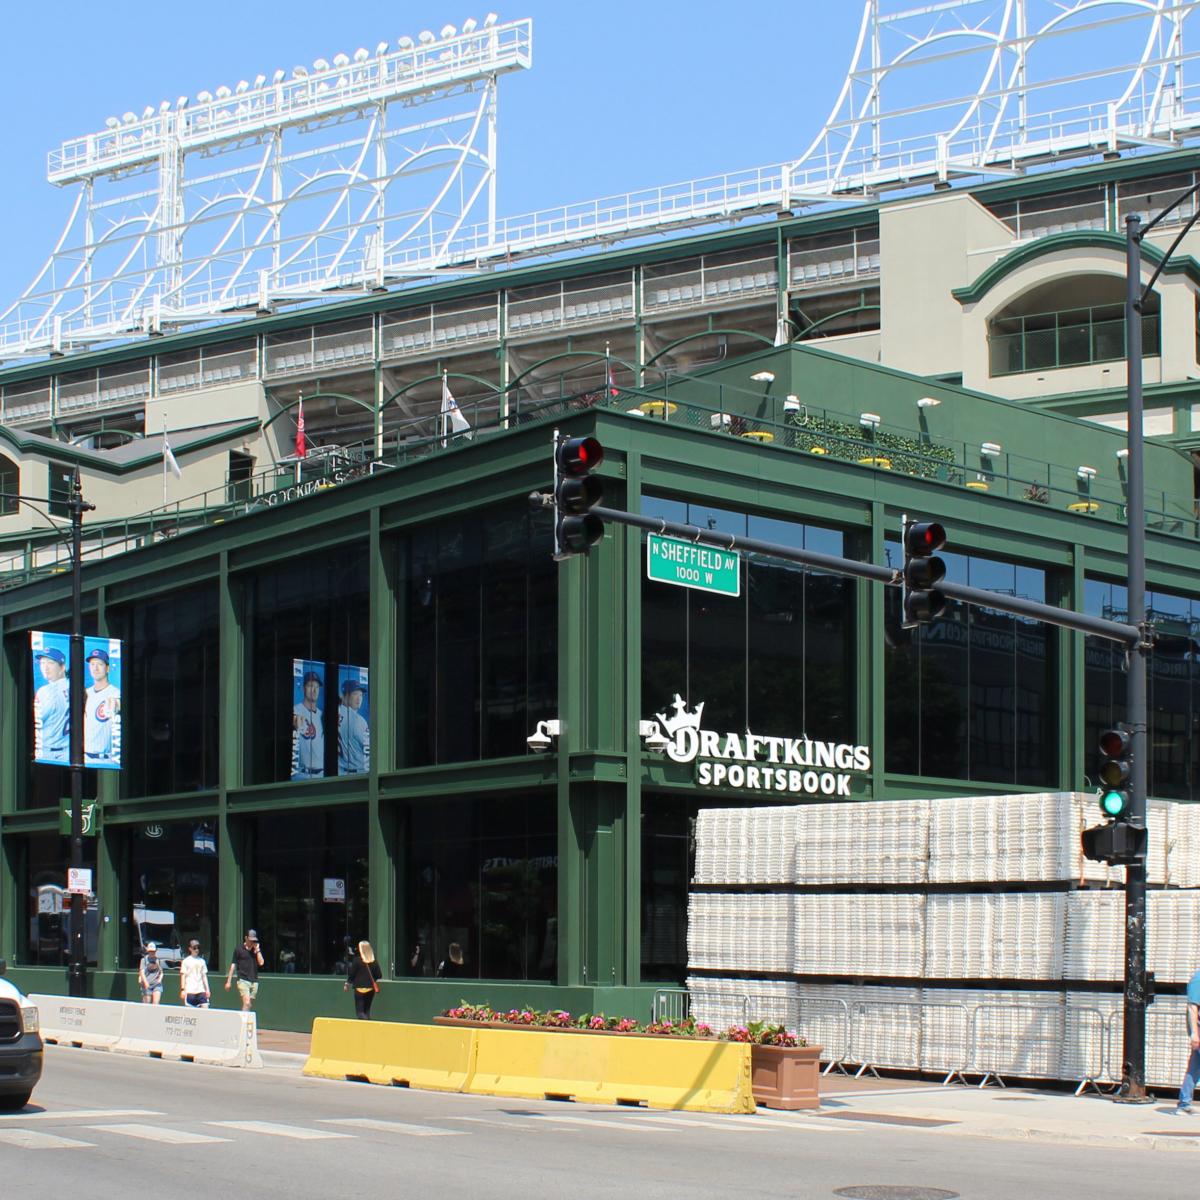 DraftKings To Open Sports Lounge At Wrigley Field Next Week